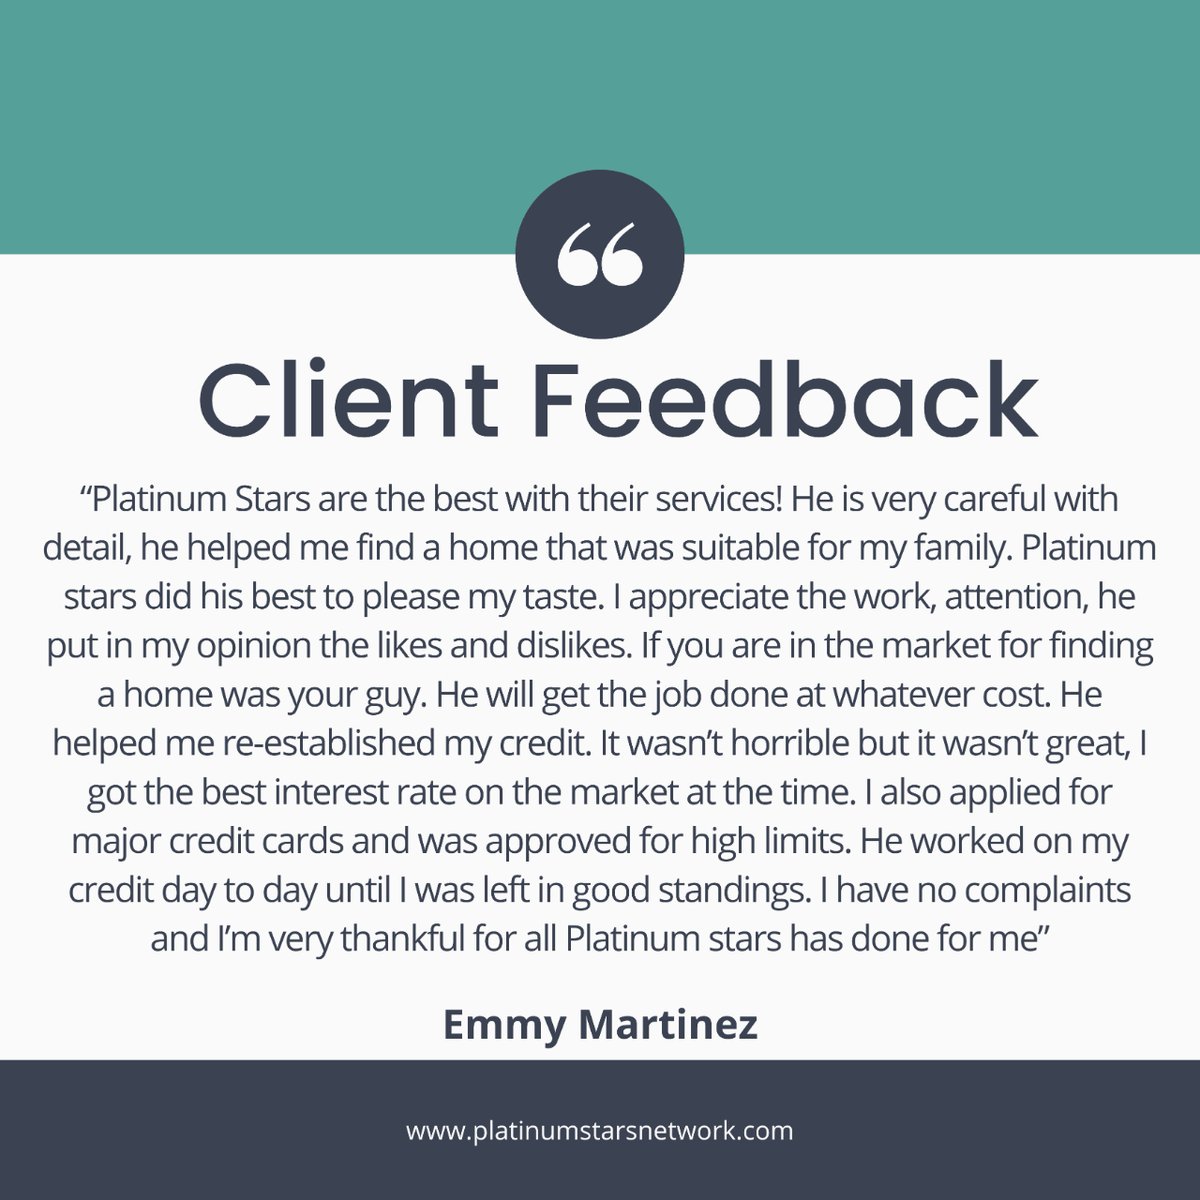 Happy Clients are our only source of Motivation!

#happycustomer #Platinumstarsnetwork #makechoice #service #services #business #marketing #service #digitalmarketing #customer #happycustomers  #customersatisfaction #customerservice #customerexperience #customerappreciation